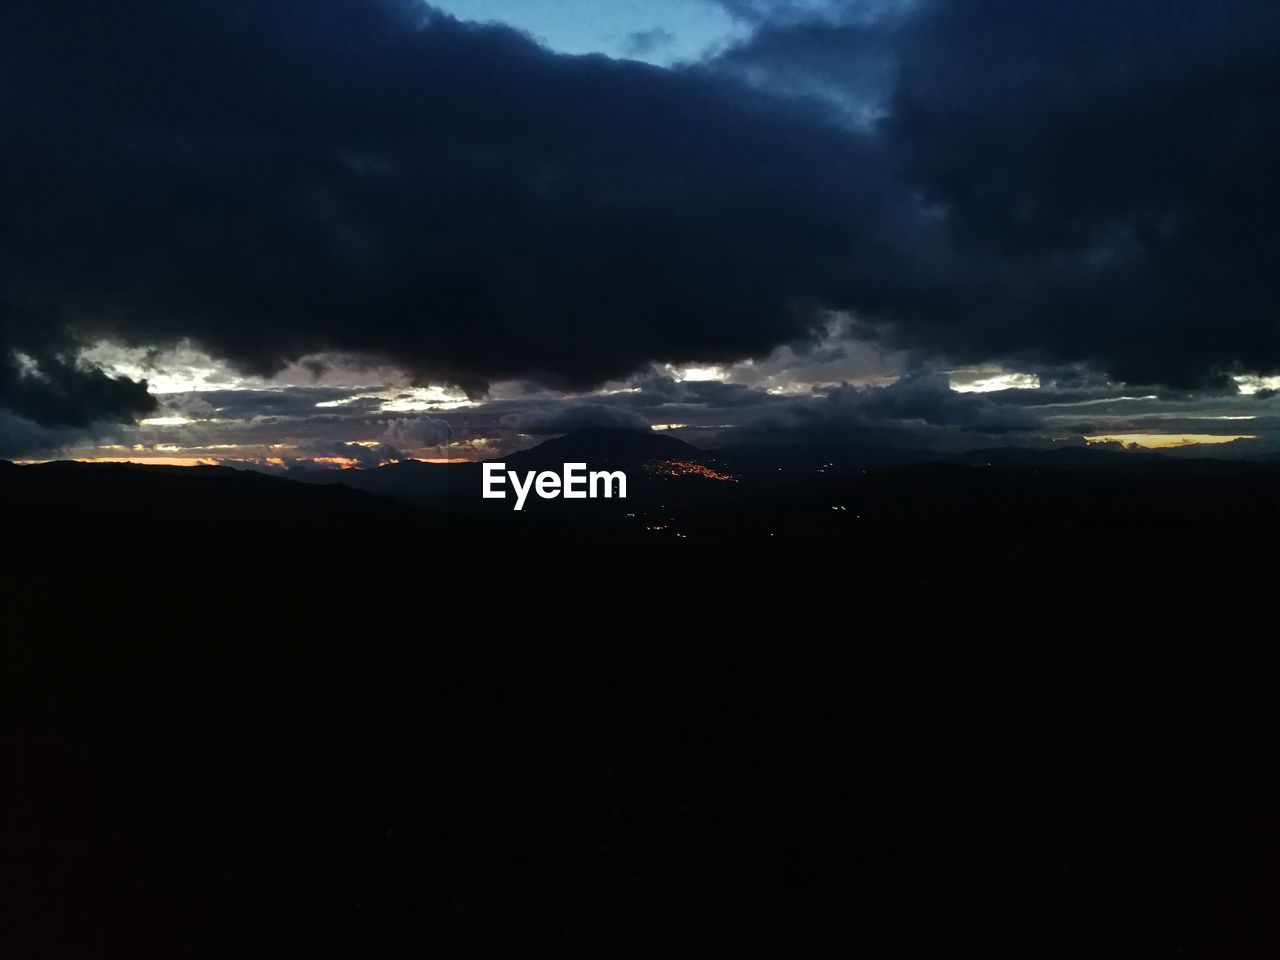 AERIAL VIEW OF STORM CLOUDS OVER SILHOUETTE LANDSCAPE